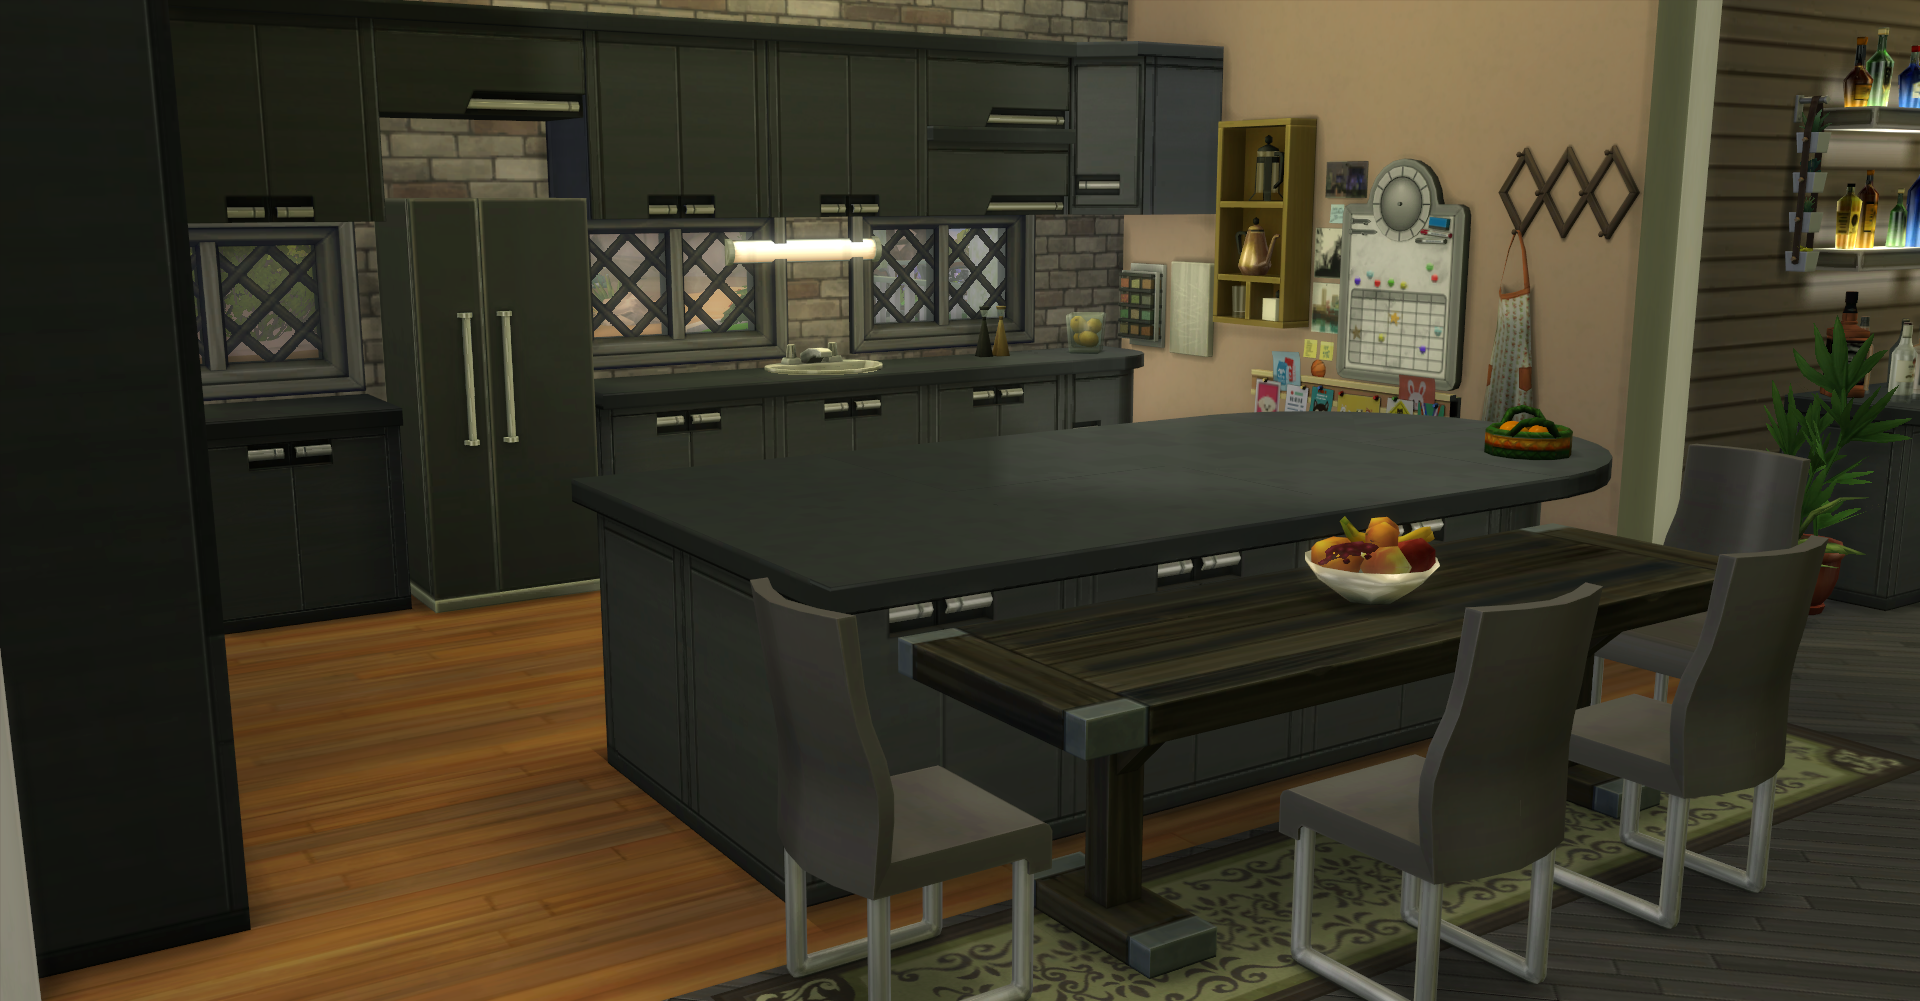 constructions sims 4 Abfm